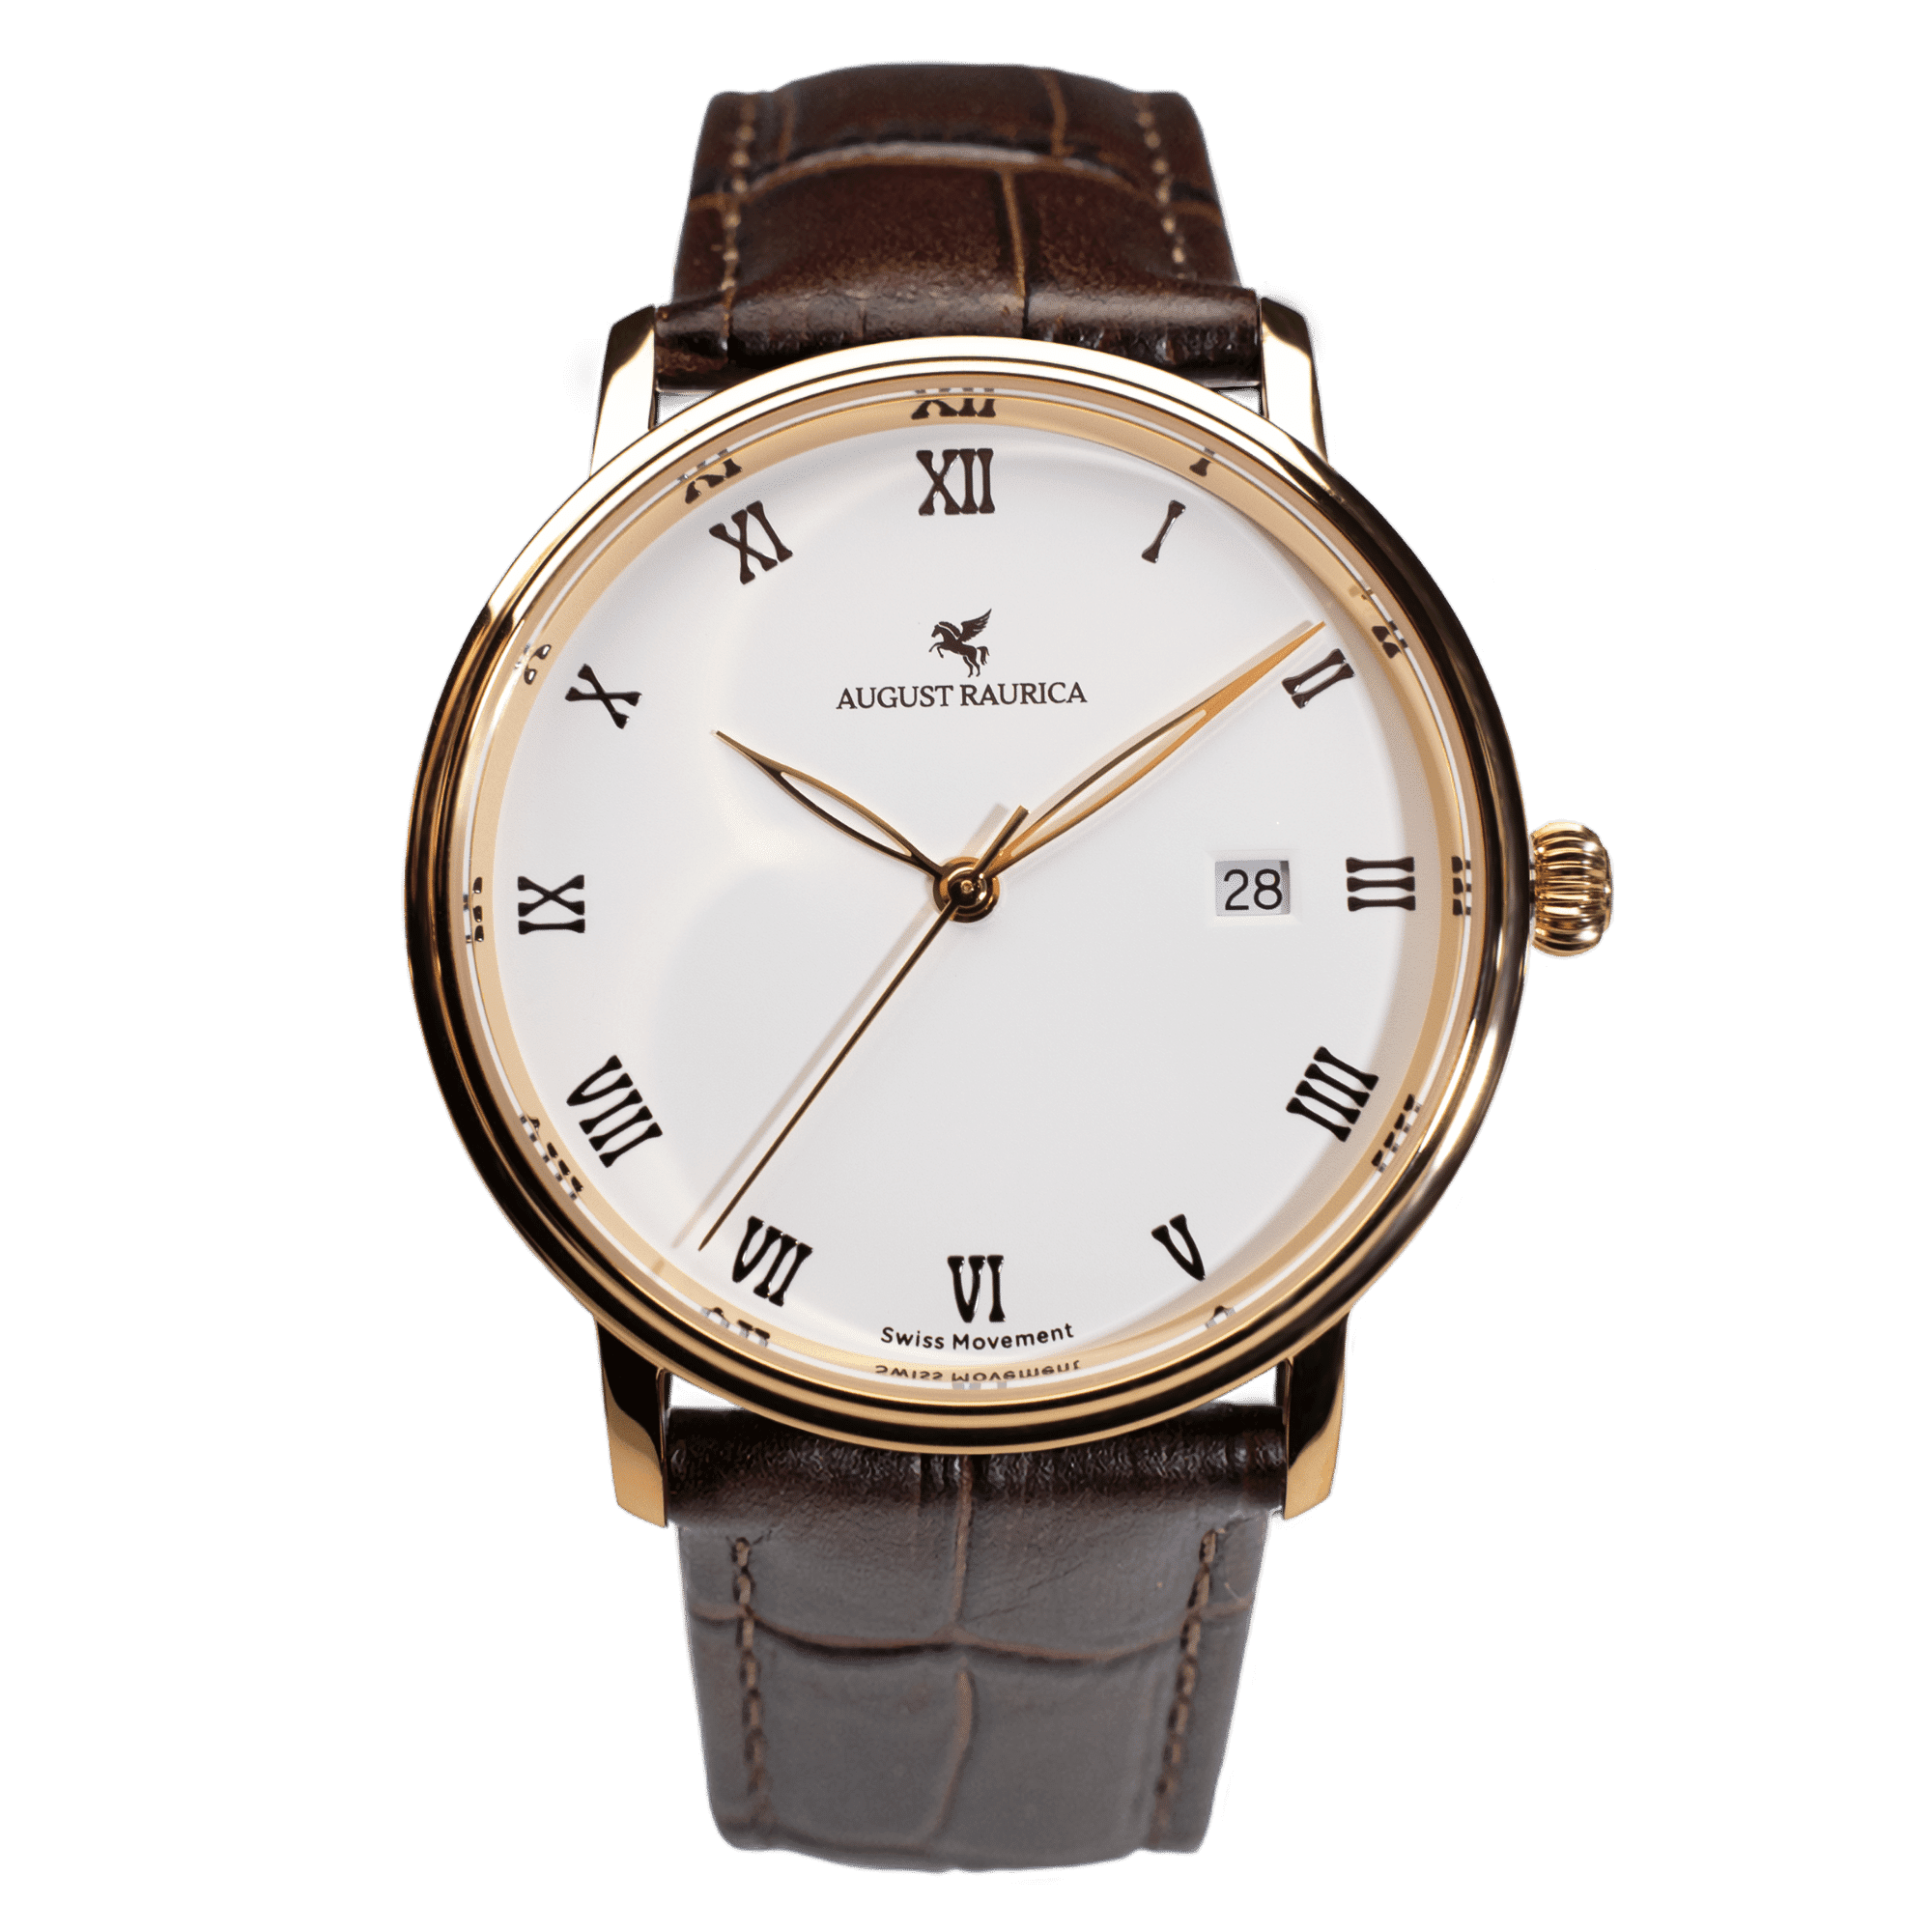 Augusta Raurica Legacy: Inspired Design" Description: Inspired by a Roman city in 44 BC, our watches reflect status and inspiration. Unveil the legacy with our August Raurica timepieces.